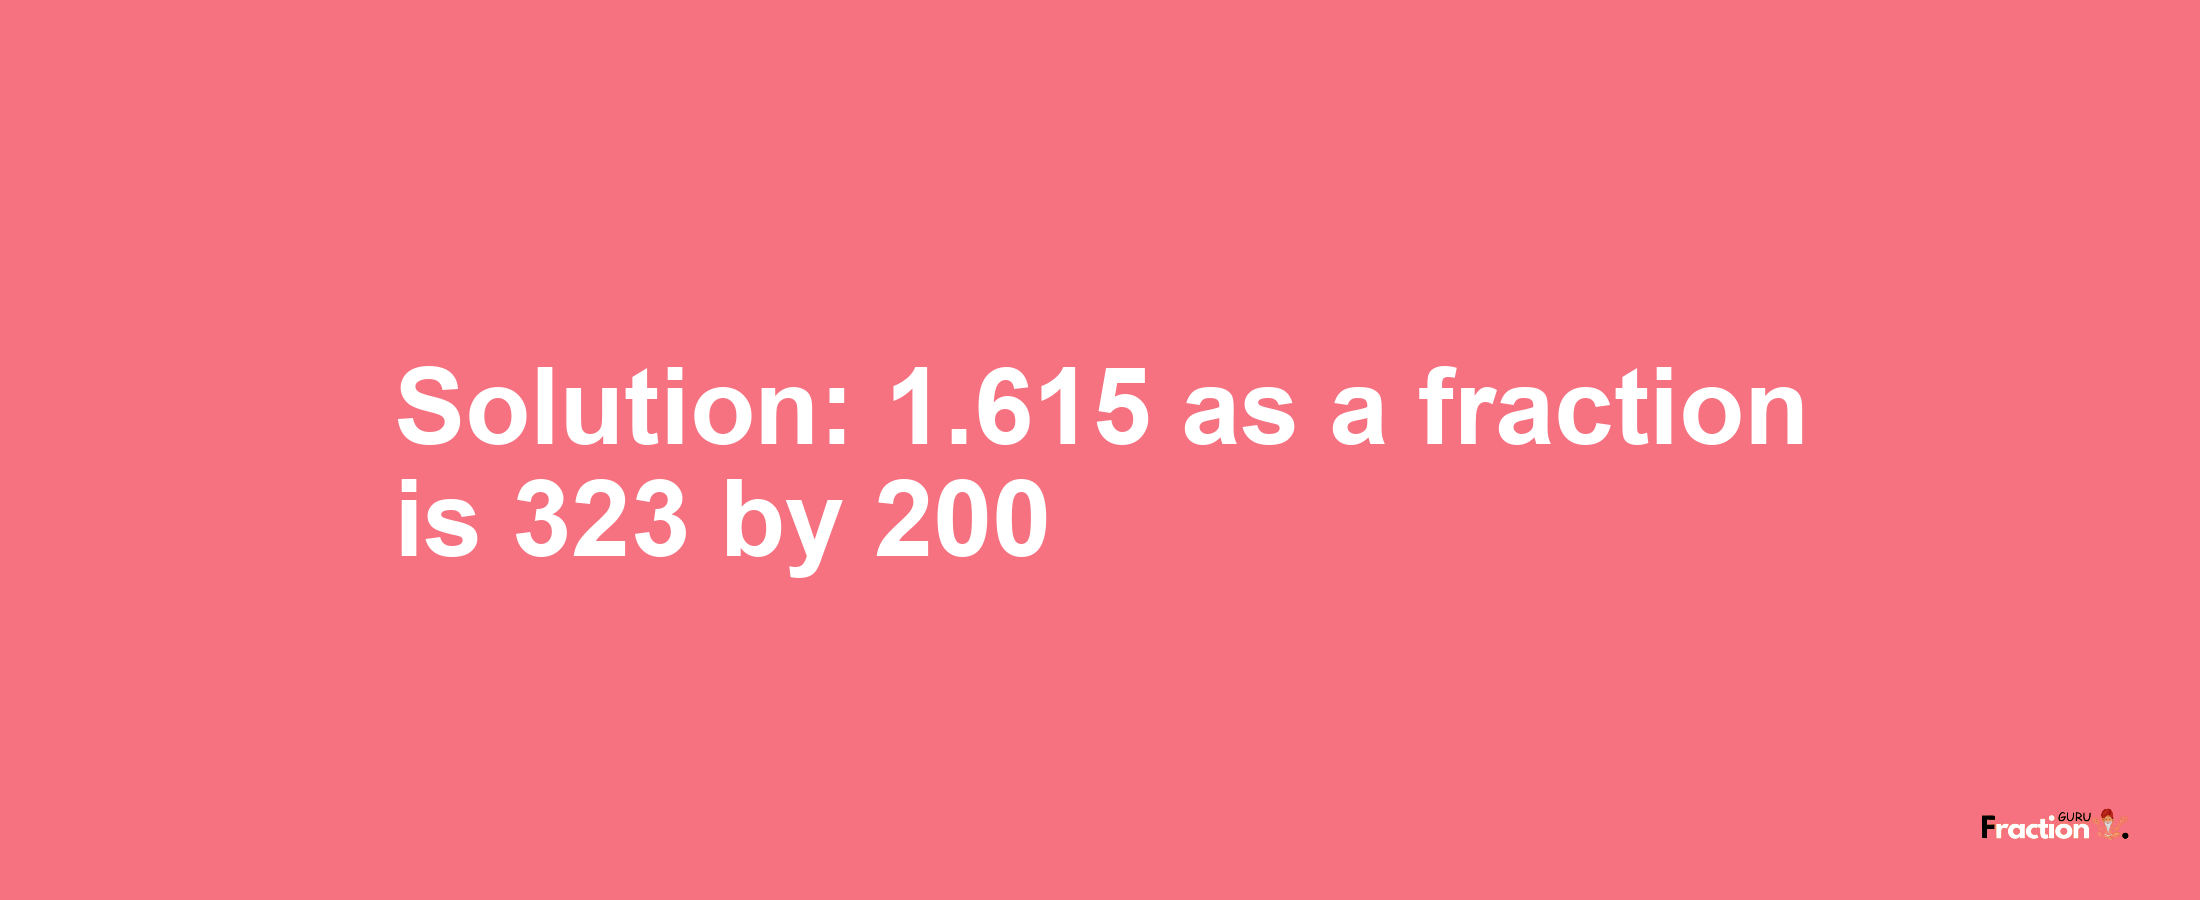 Solution:1.615 as a fraction is 323/200